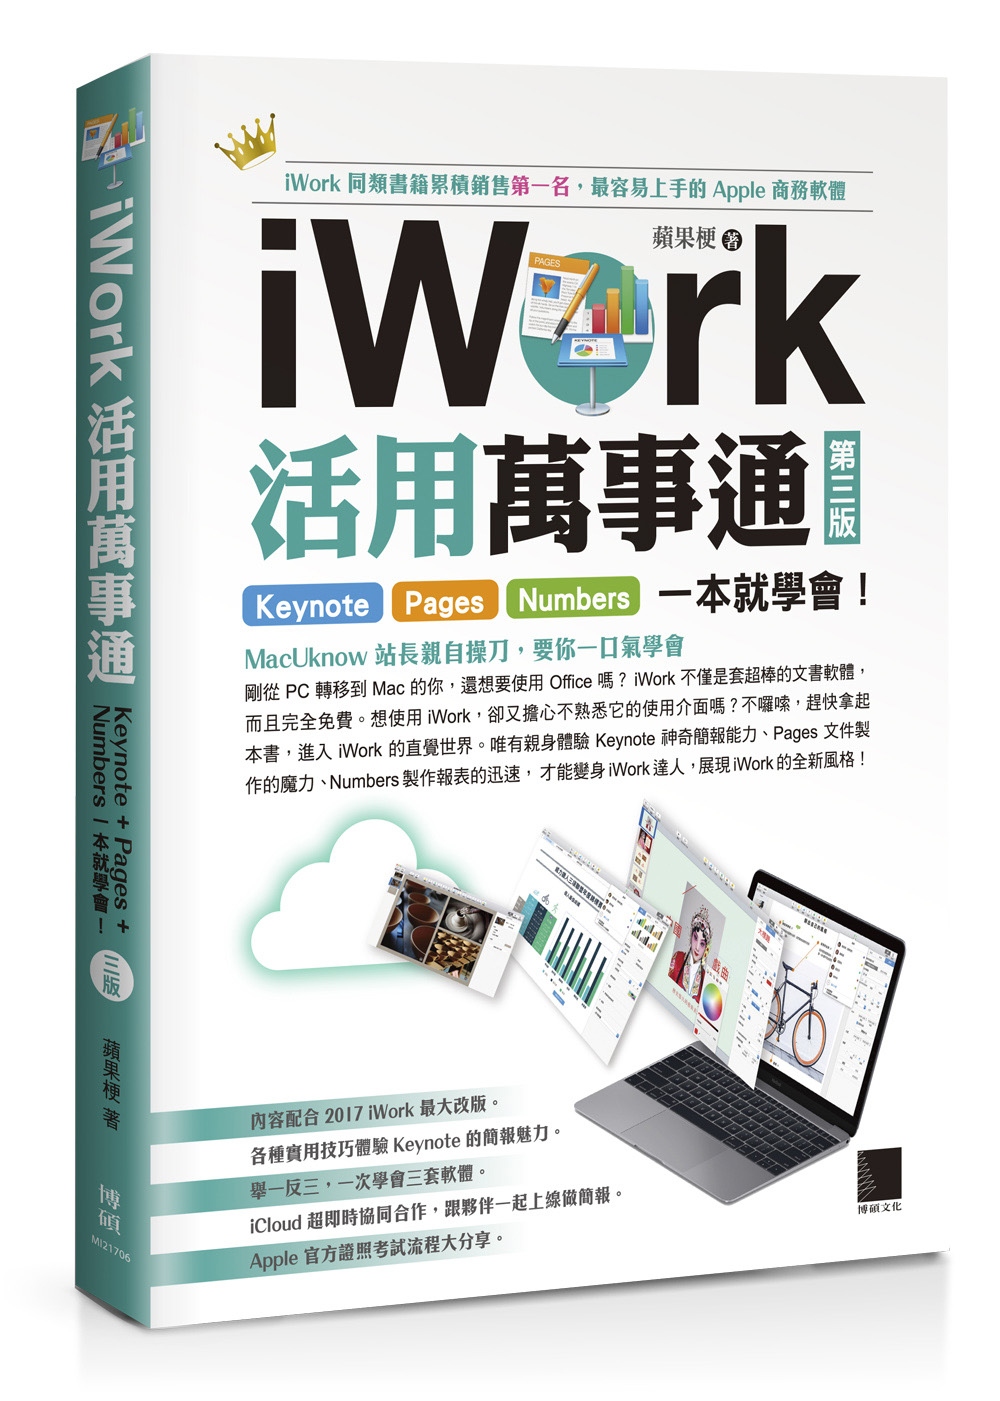 iWork活用萬事通：Keynote+Pages+Numbe...